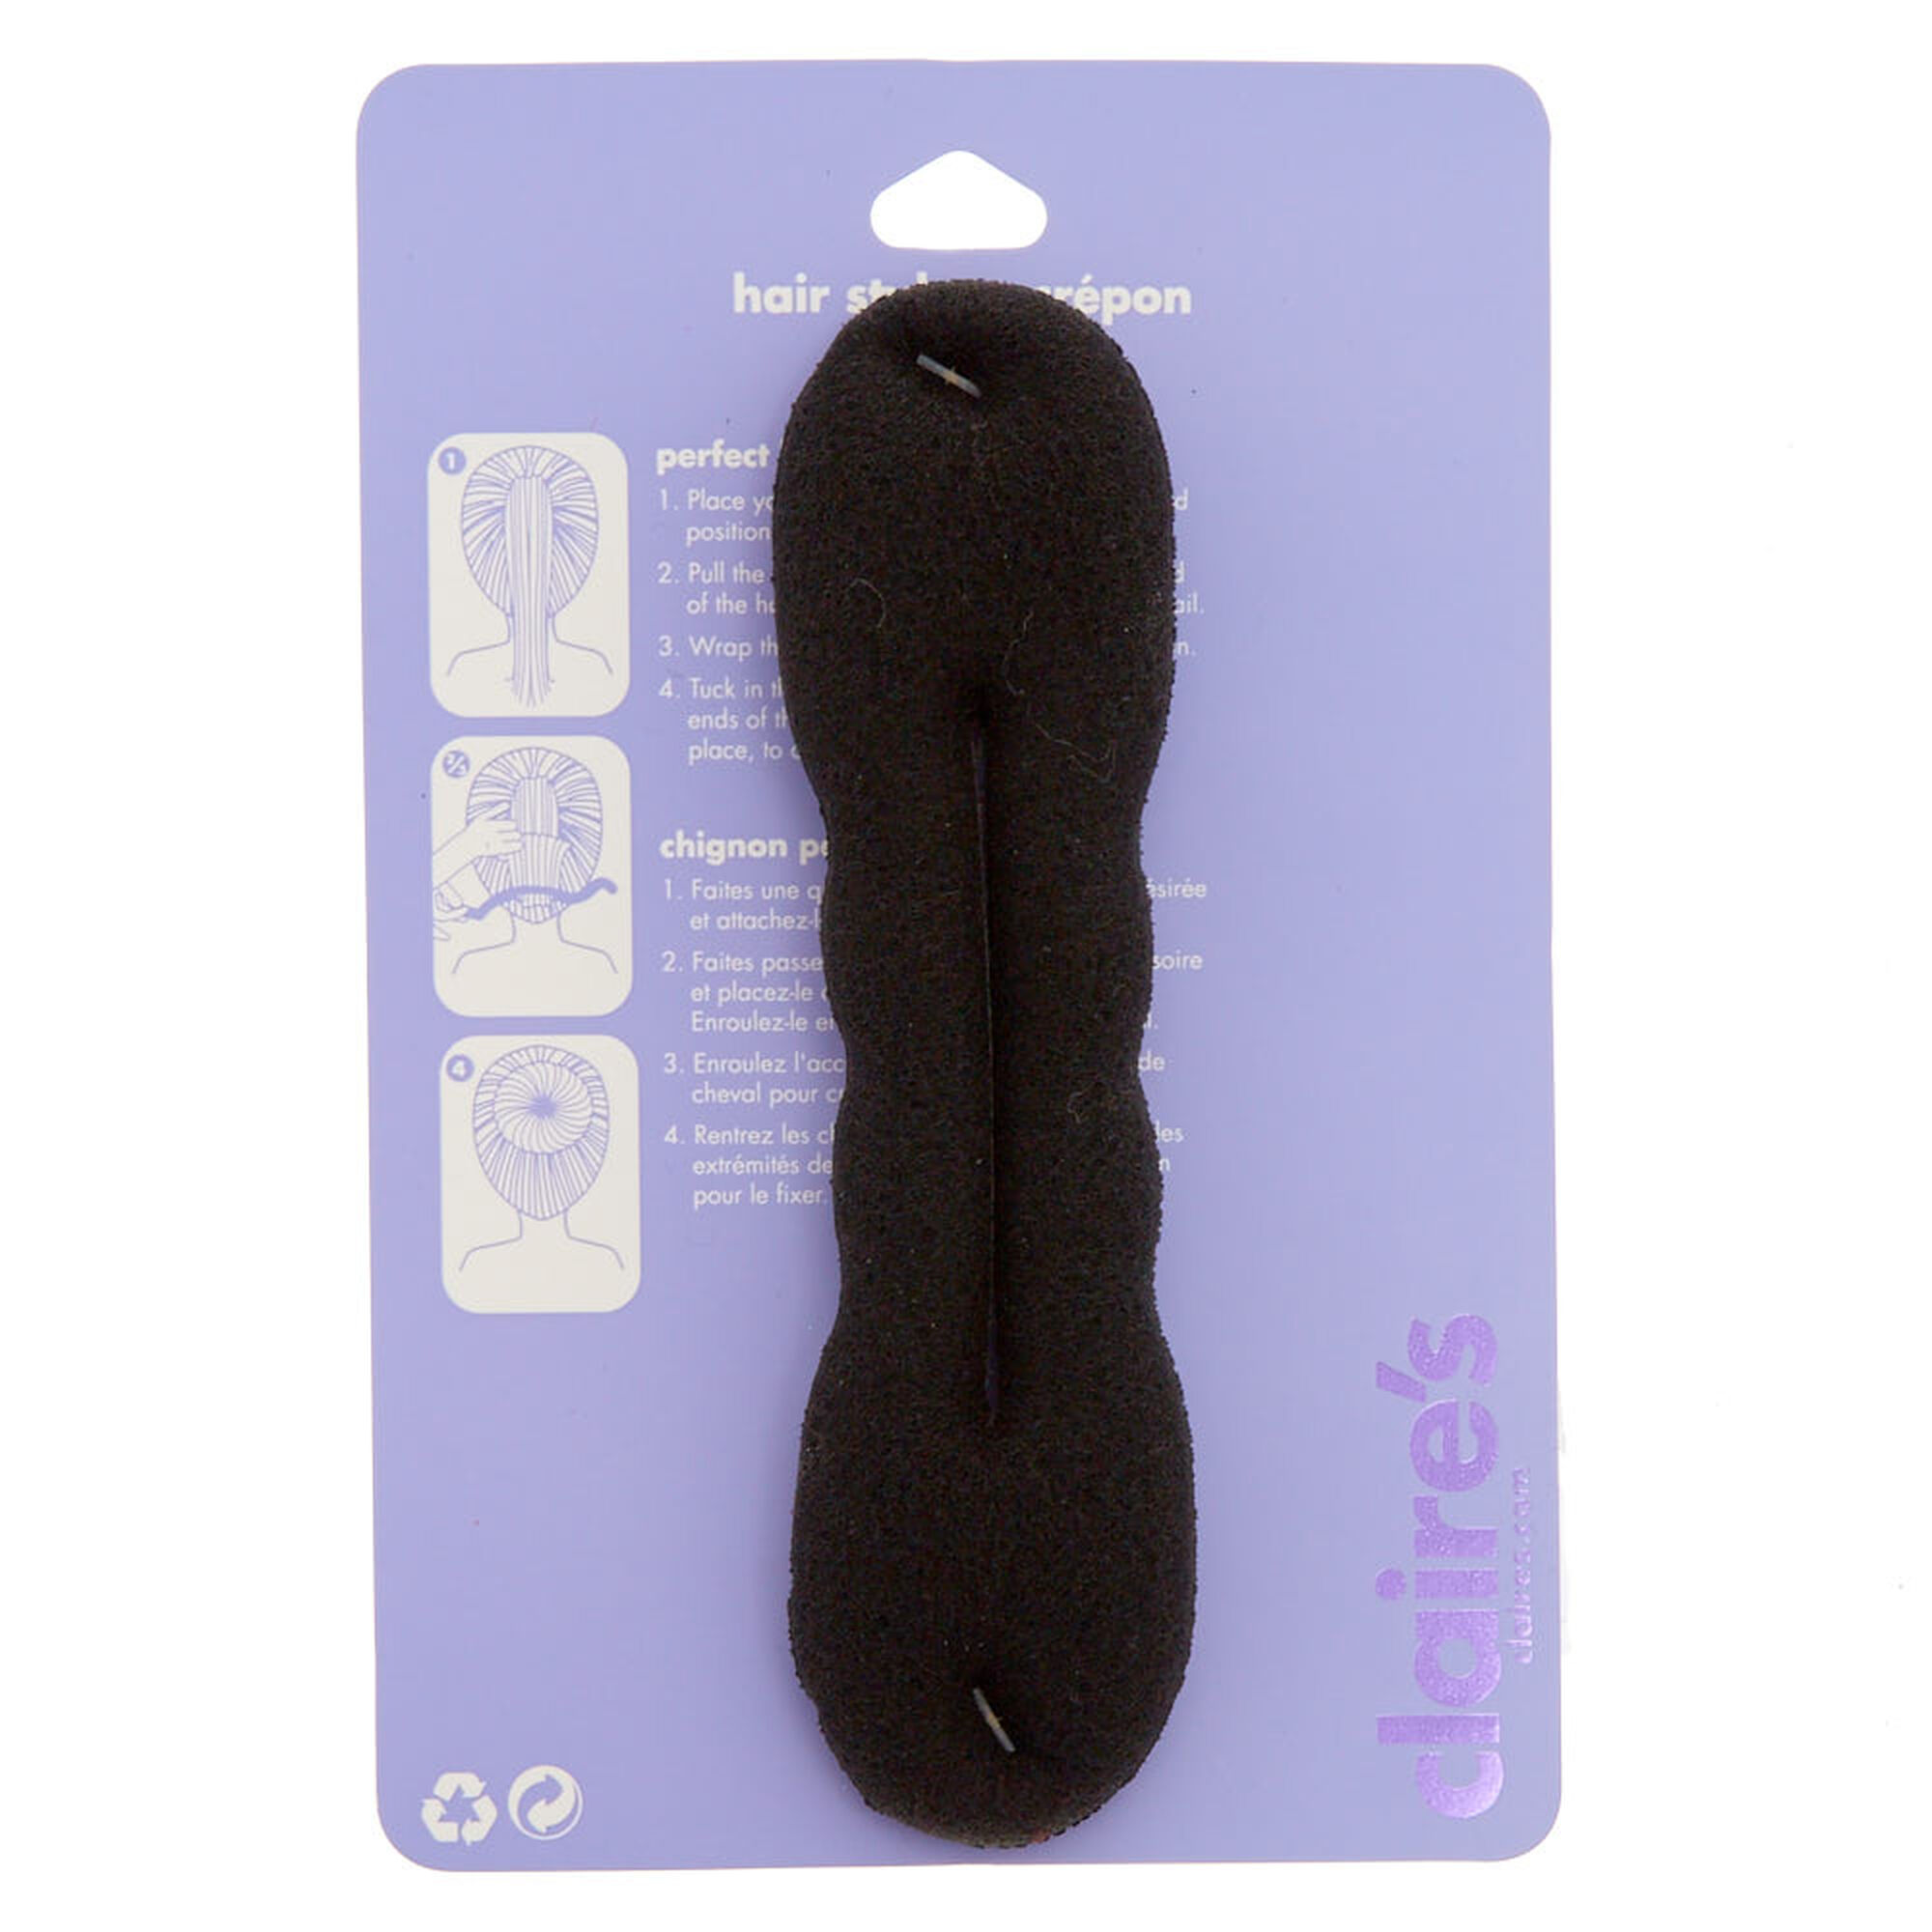 View Claires Small Bun Hair Tool Black information